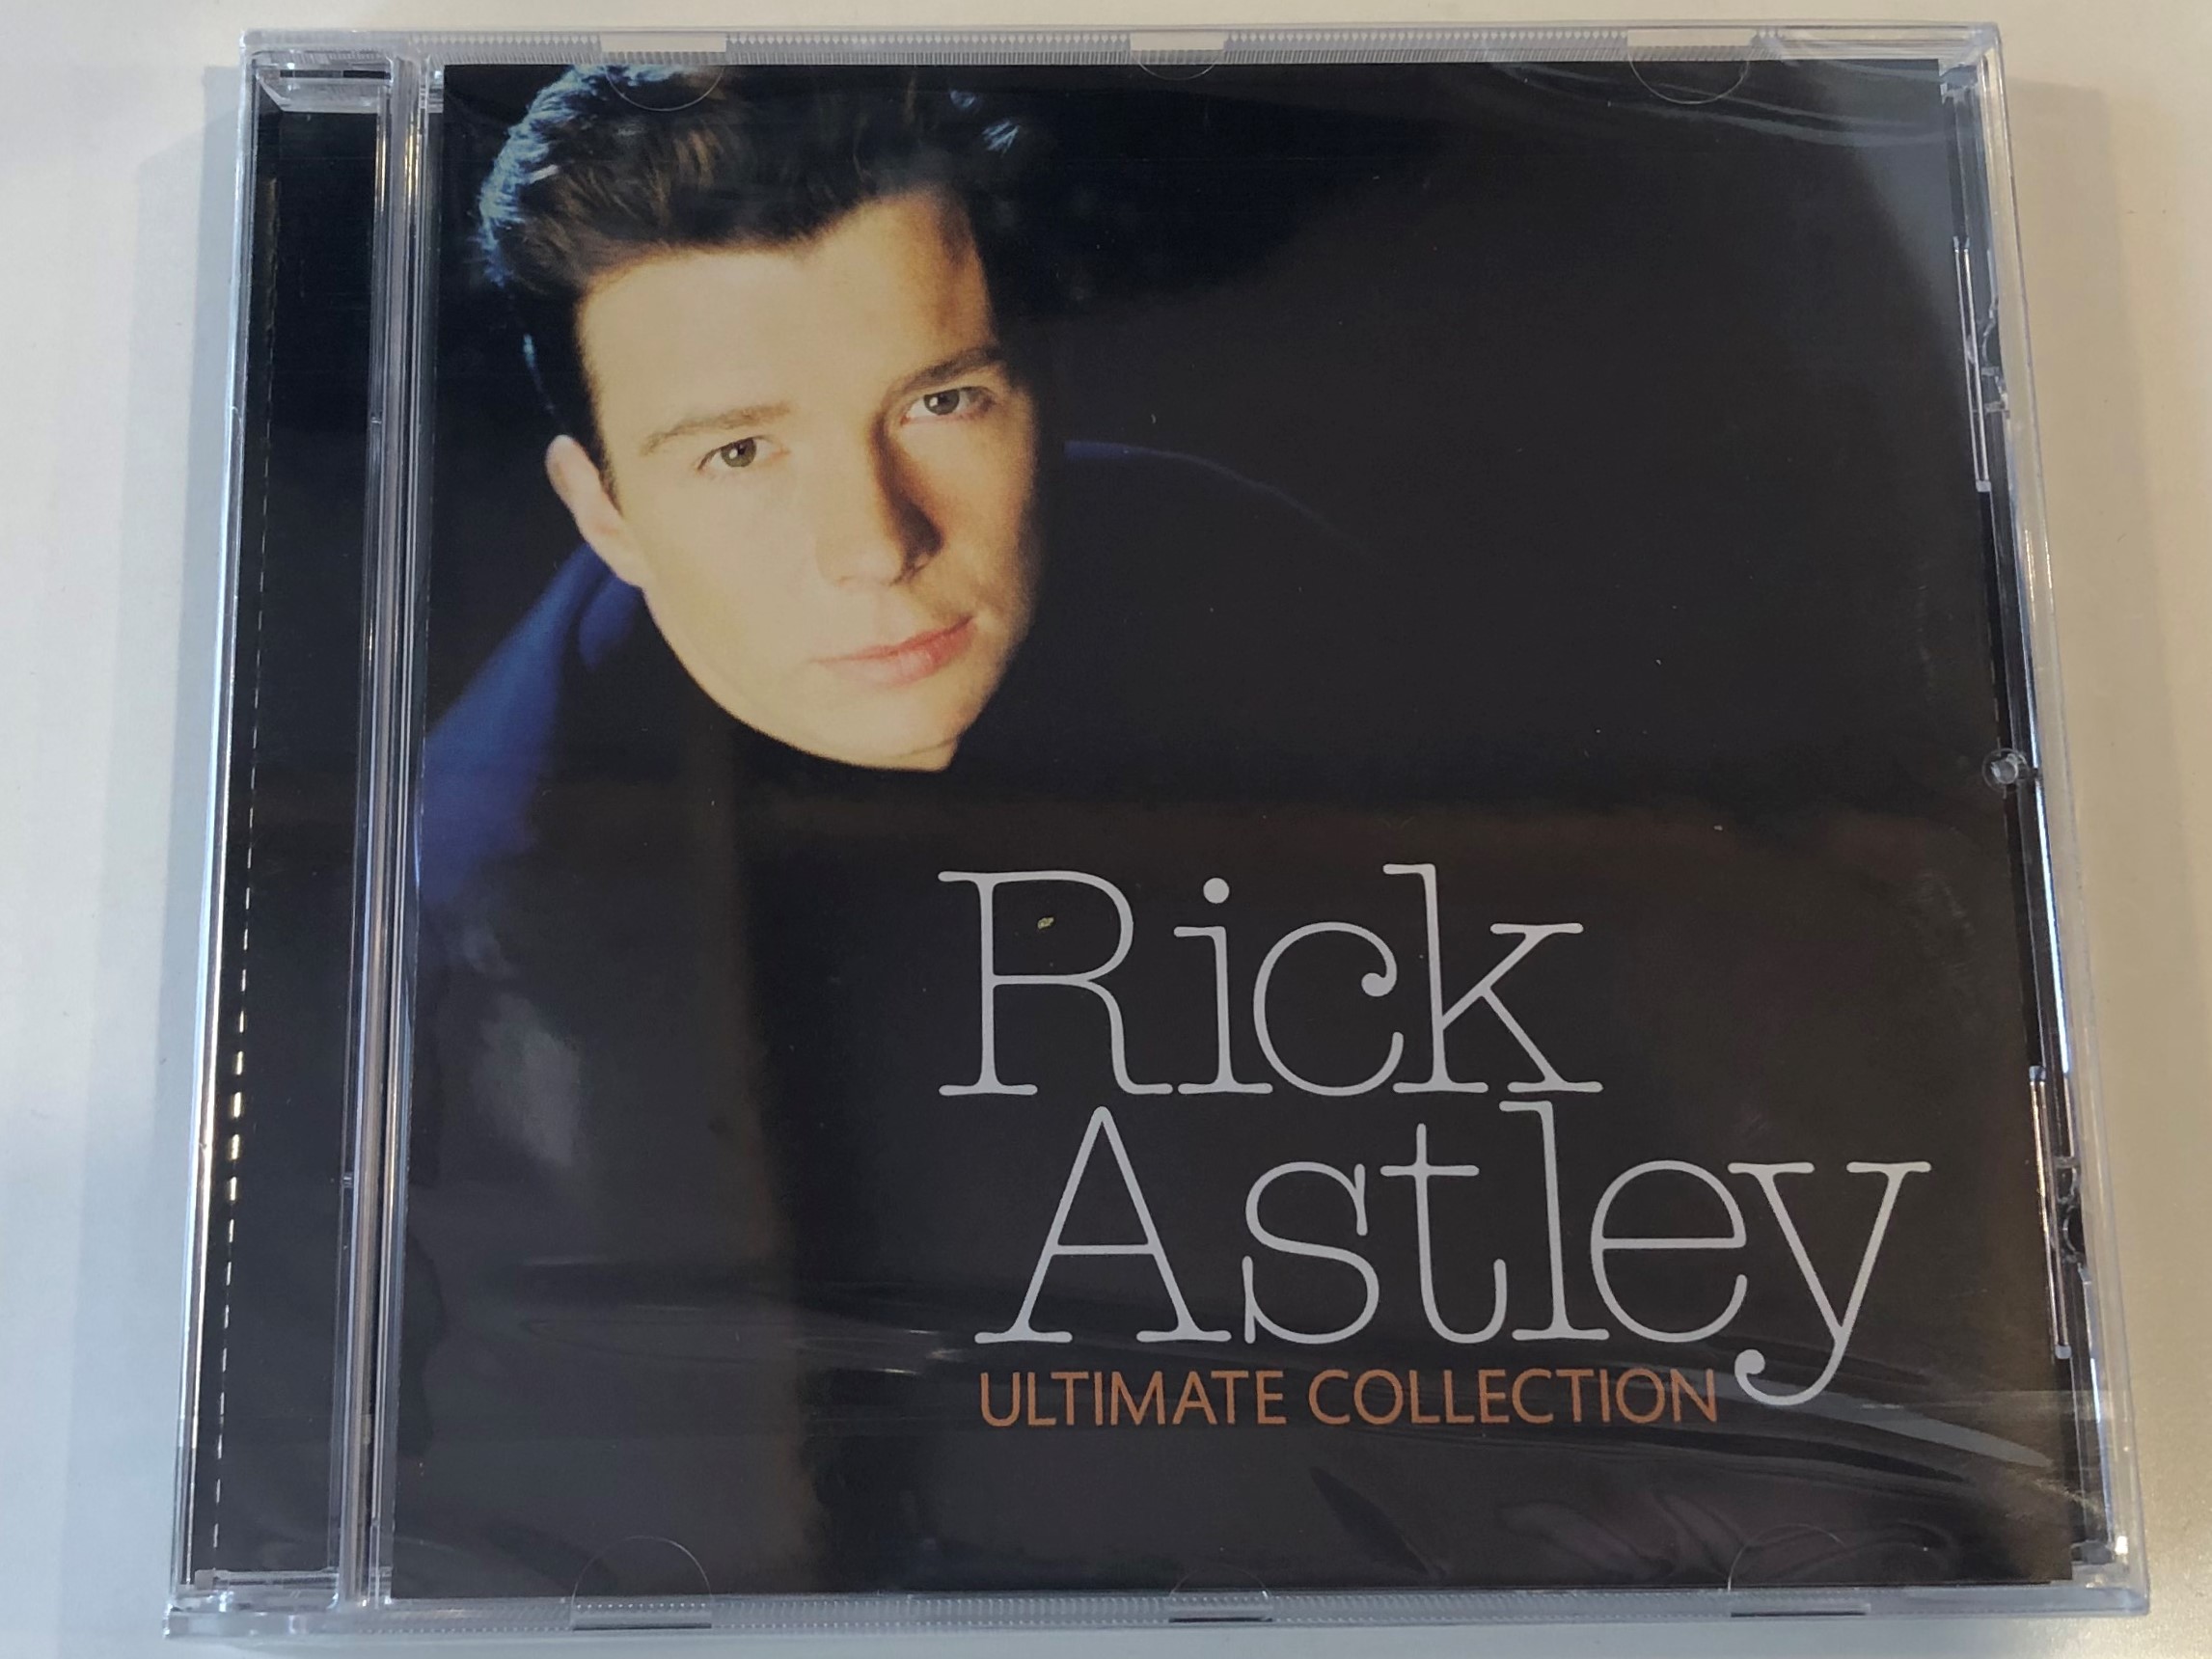 rick-astley-ultimate-collection-sony-bmg-music-entertainment-audio-cd-2008-886973038024-1-.jpg